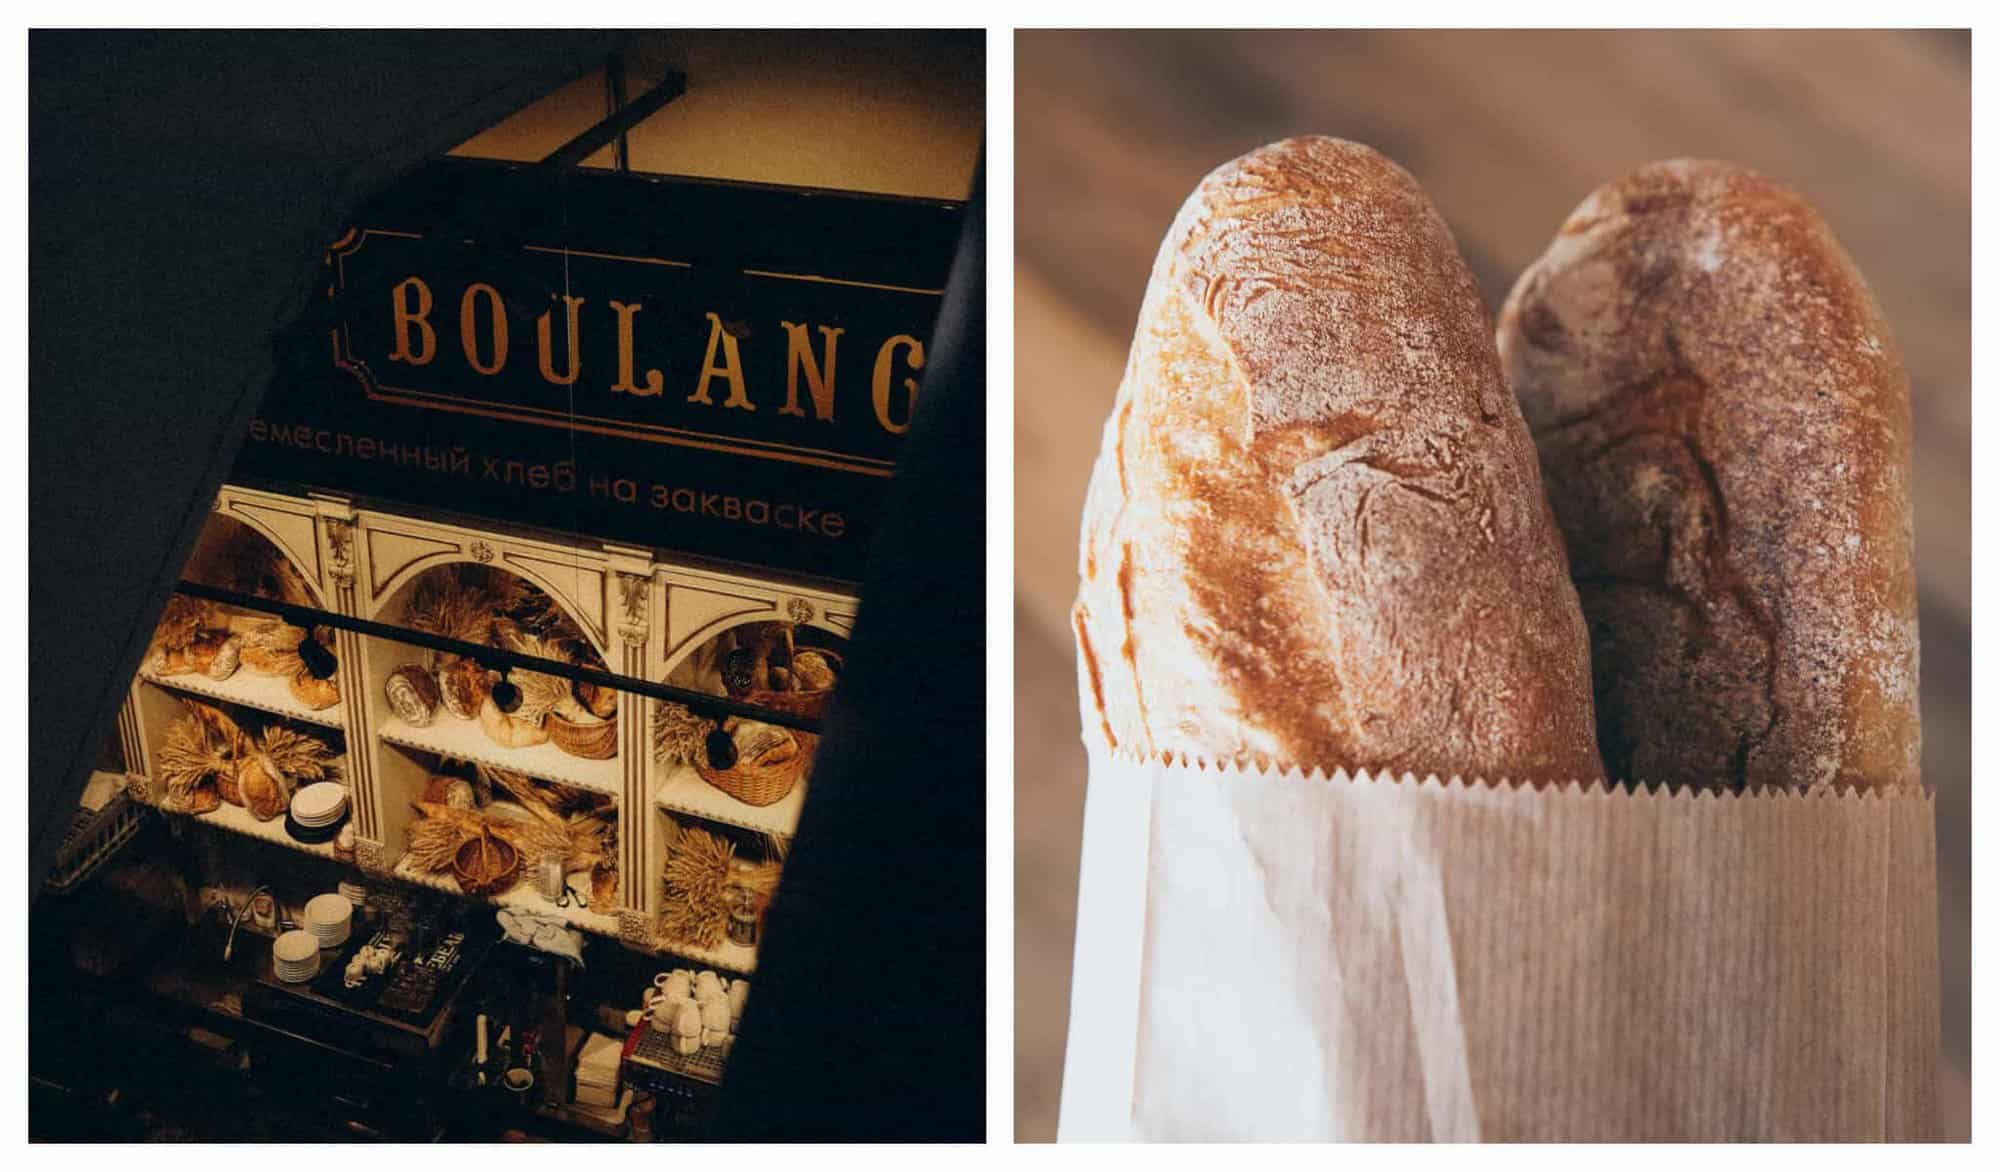 Left: A French bakery or boulangerie with its black store logo and its display of different kinds of bread; Right: Two baguettes or elongated French breads are wrapped in a white paper bag.